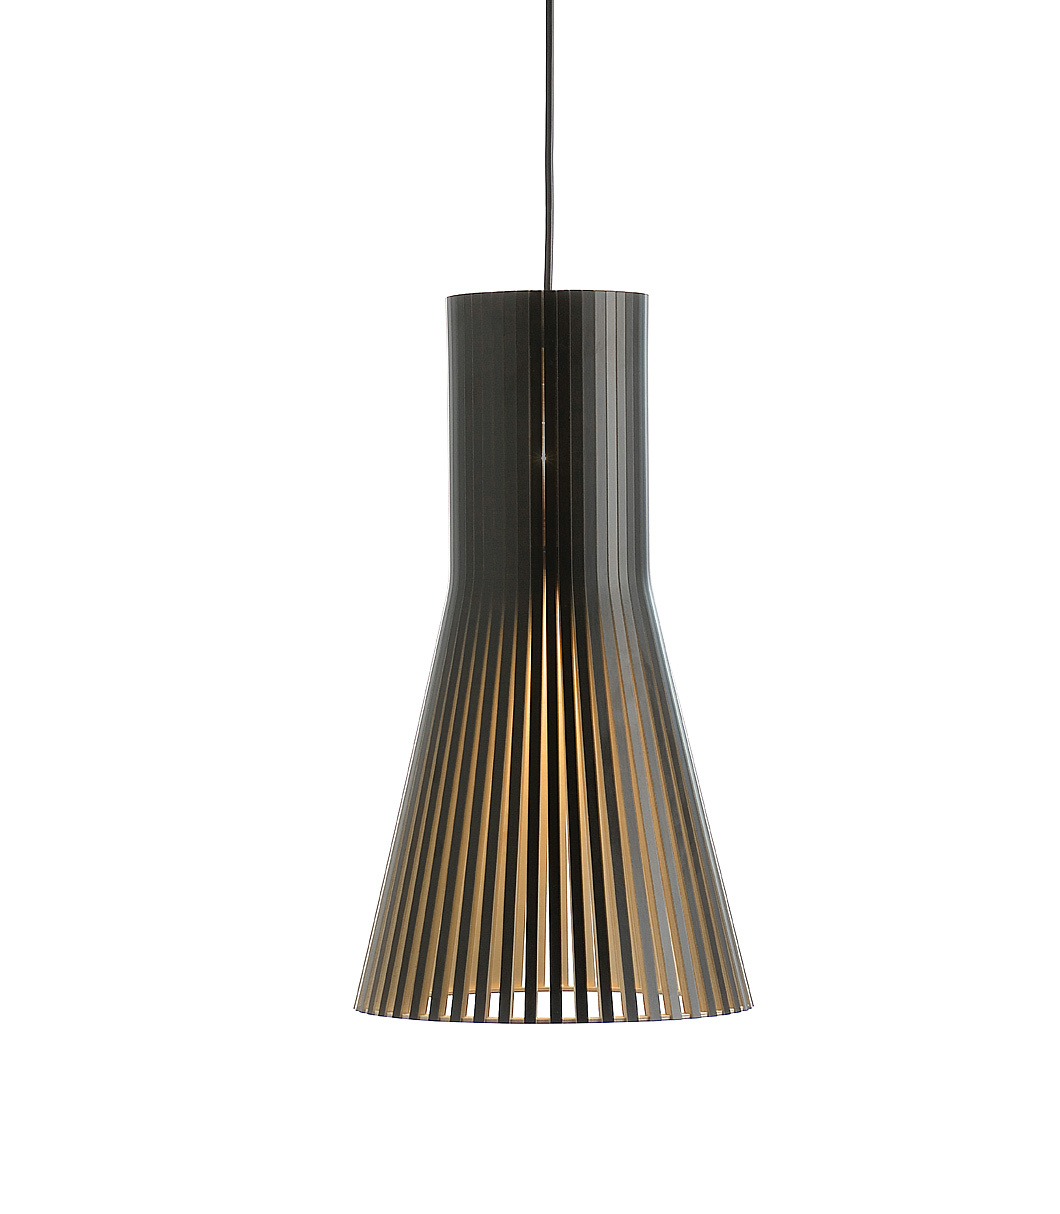 Secto Small 4201 pendant lamp is available in black laminated